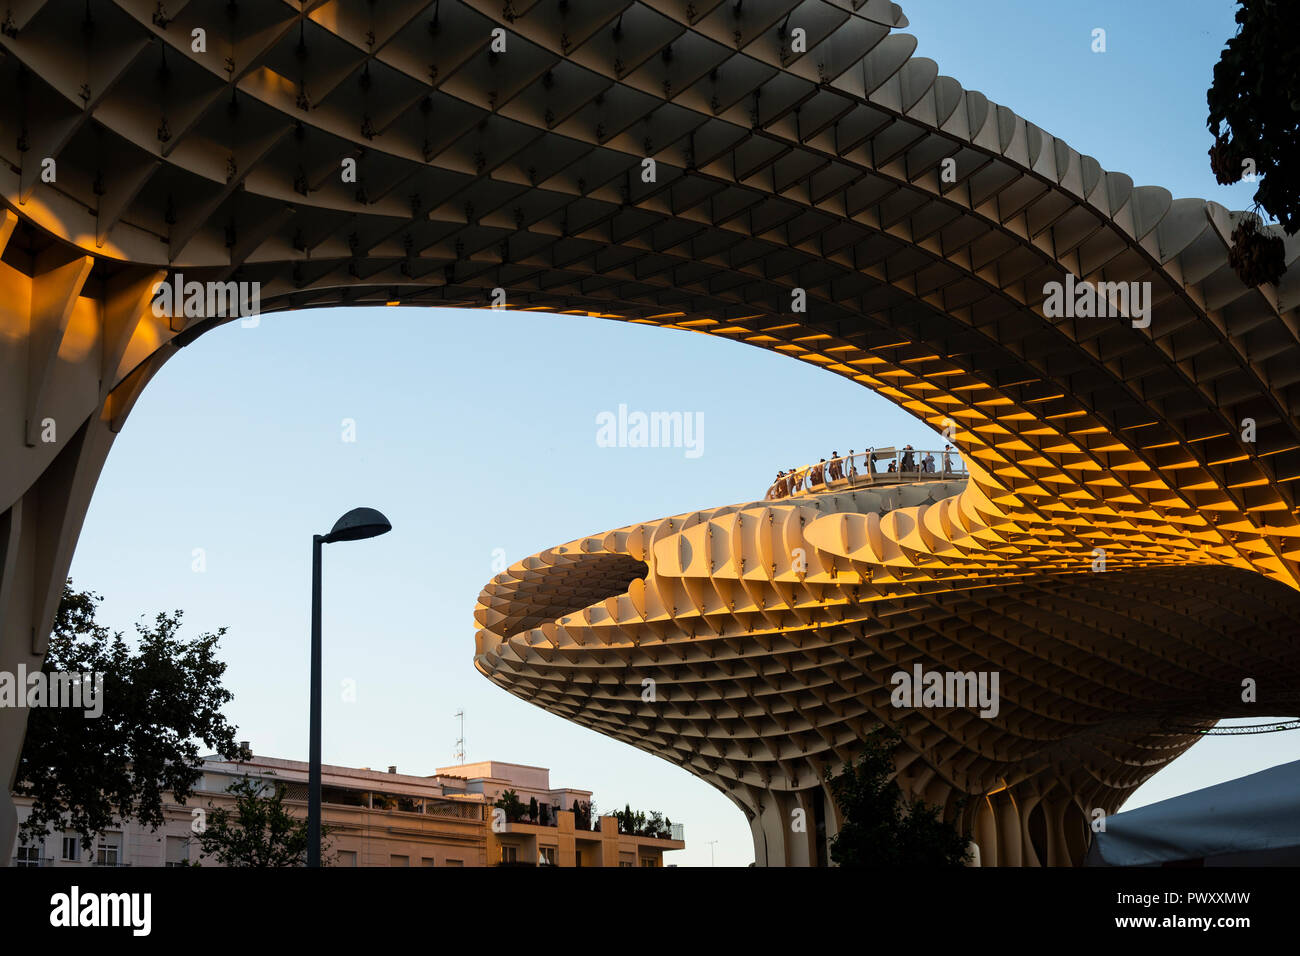 People on the viewing platform of the Metropol Parasol in Seville, Spain Stock Photo